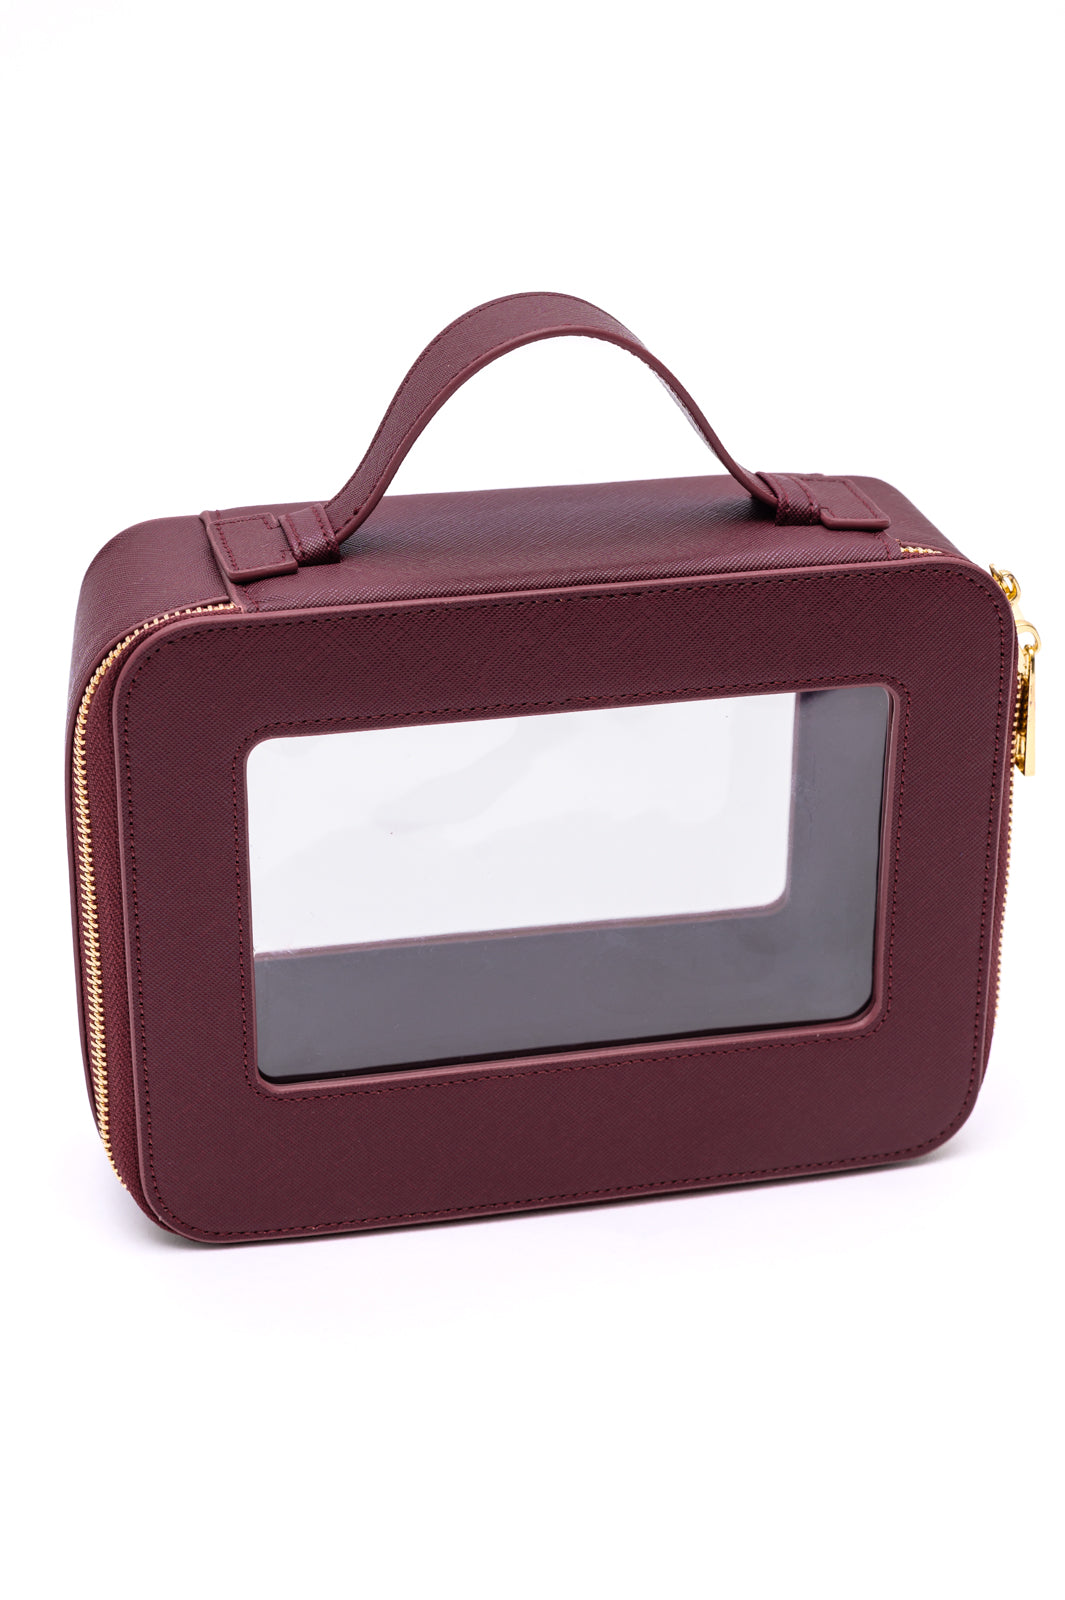 PU Leather Travel Cosmetic Case in Wine-Womens-OS-mercuryfoodservice Shop for Women & Kids